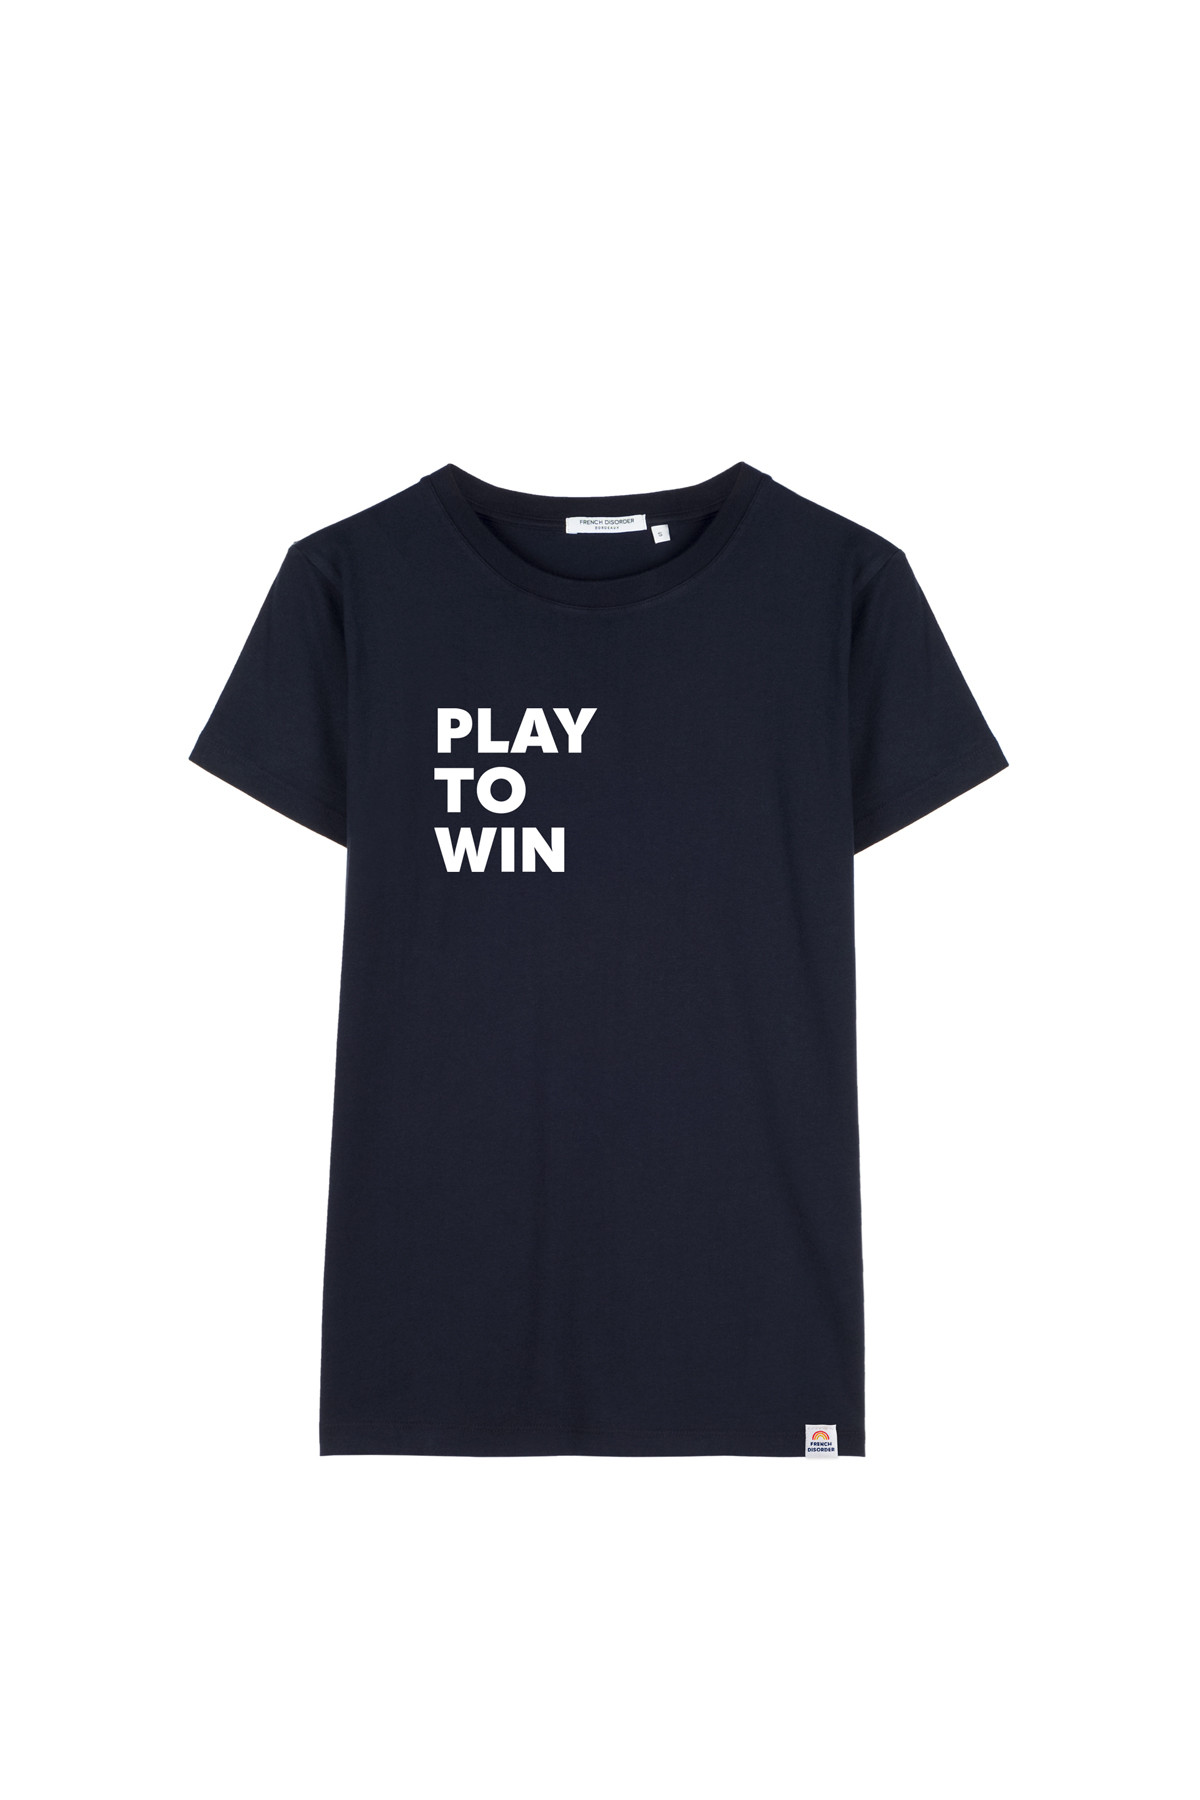 Tshirt PLAY TO WIN French Disorder